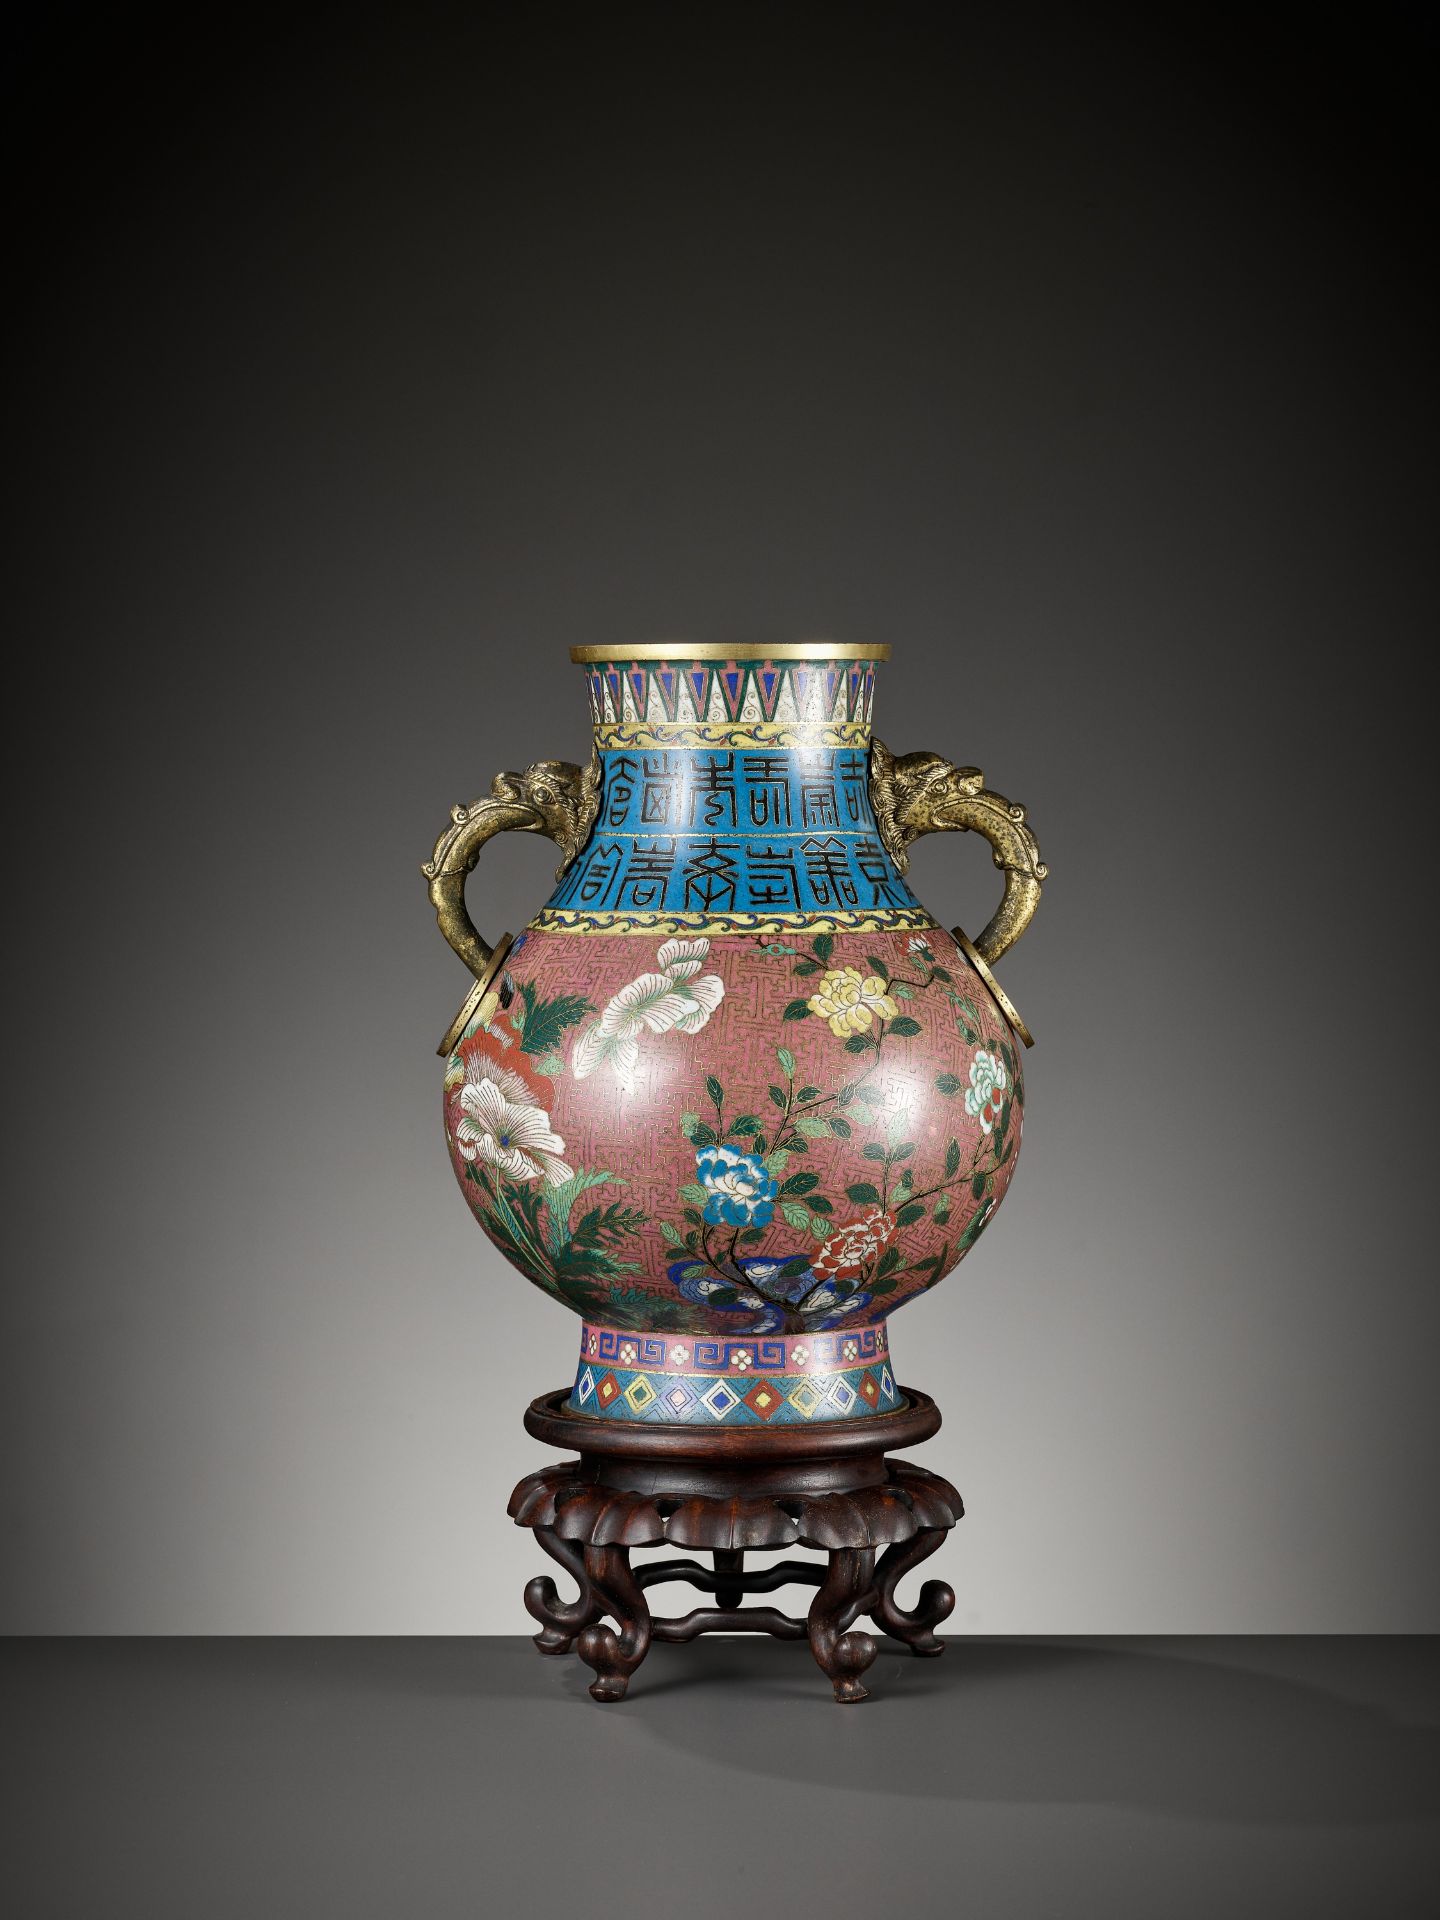 A GILT-BRONZE AND CLOISONNE ENAMEL 'CRICKET' VASE, HU, JIAQING PERIOD - Image 7 of 14